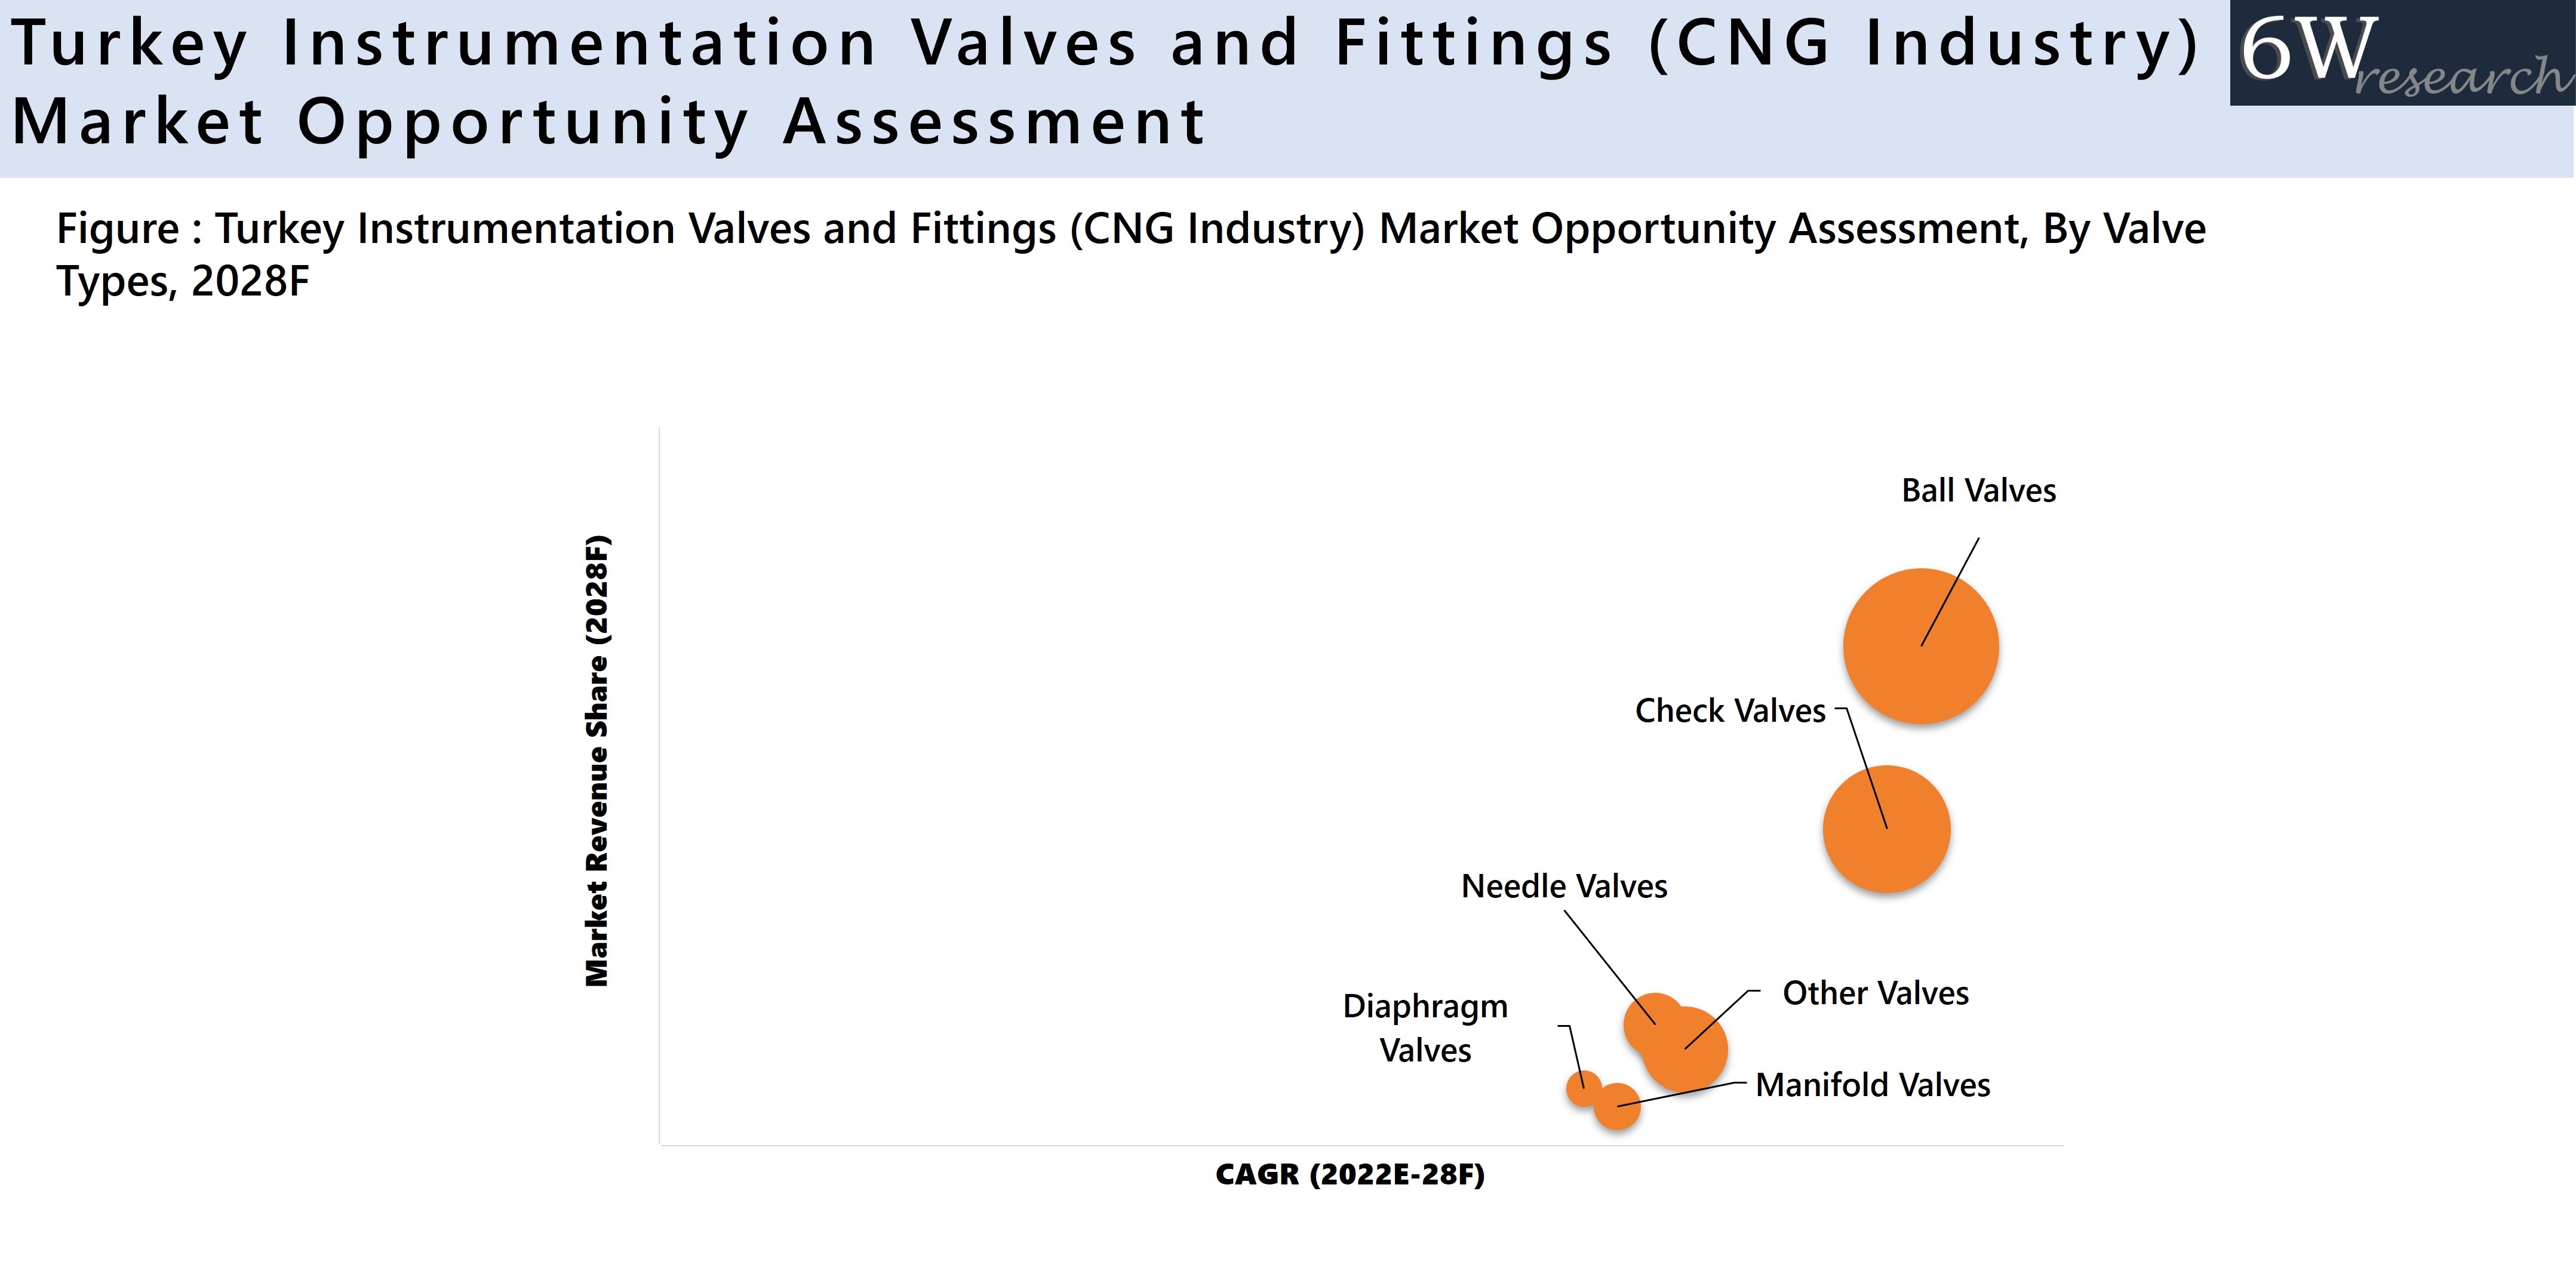 Turkey Instrumentation Valves and Fittings (CNG Industry) Market Opportunity Assessment